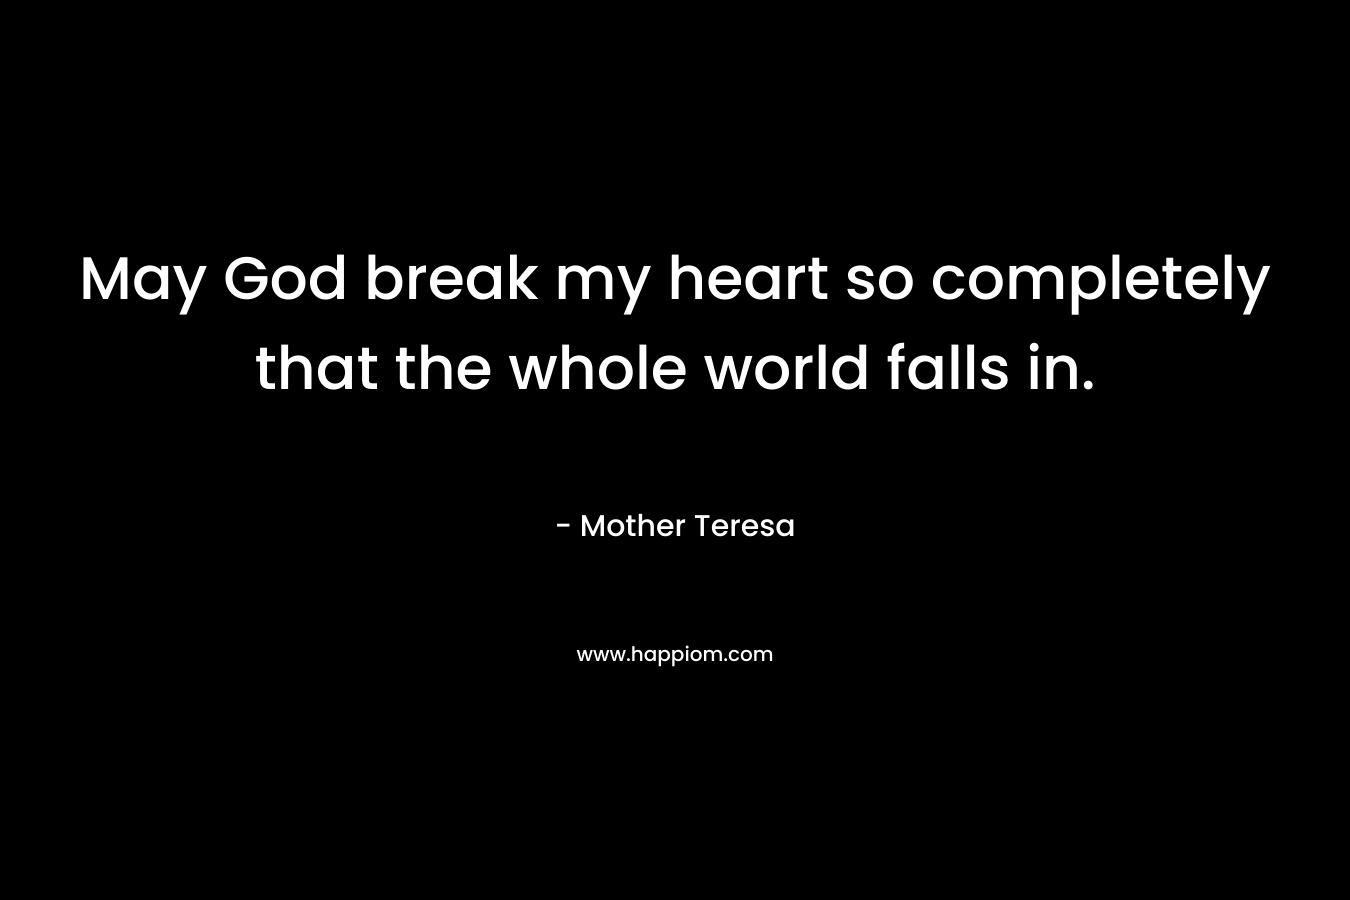 May God break my heart so completely that the whole world falls in.